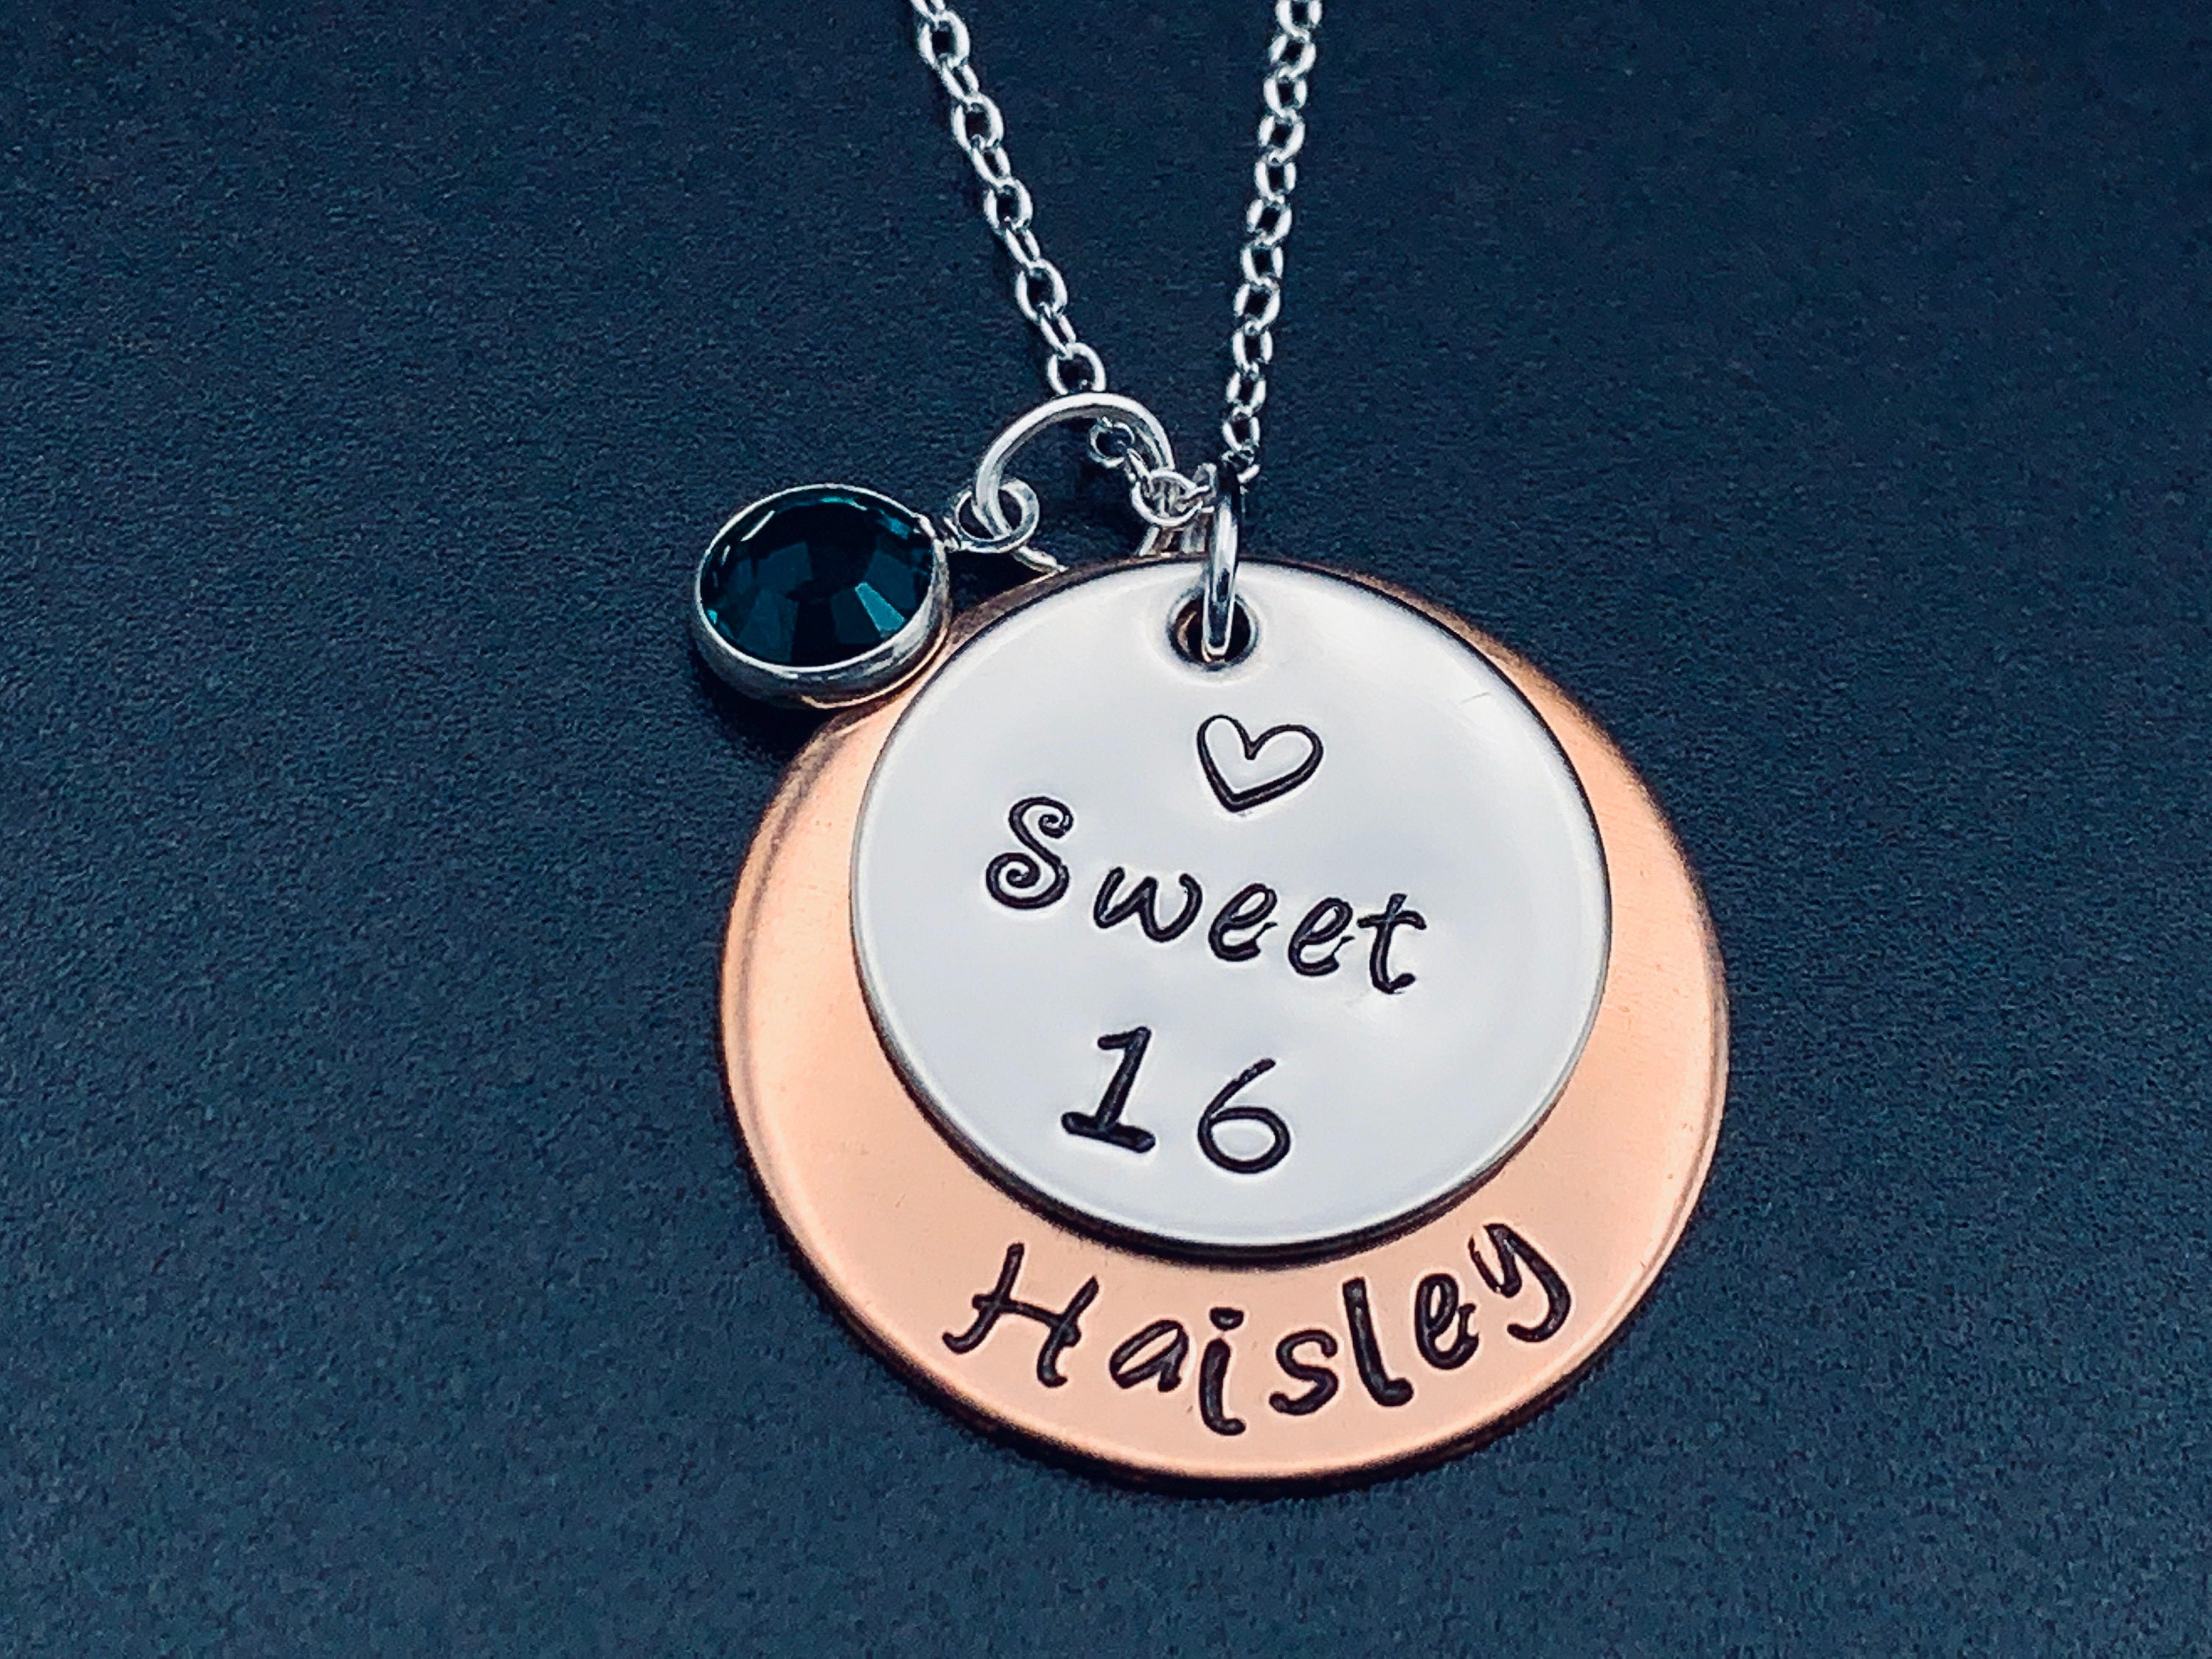 Amazon.com: Sweet 16 Necklace with Birthstone, Sweet 16 Jewelry, Sweet 16  Gift, Gift for Daughter, Gift for Friend, Sweet 16 Birthday : Handmade  Products